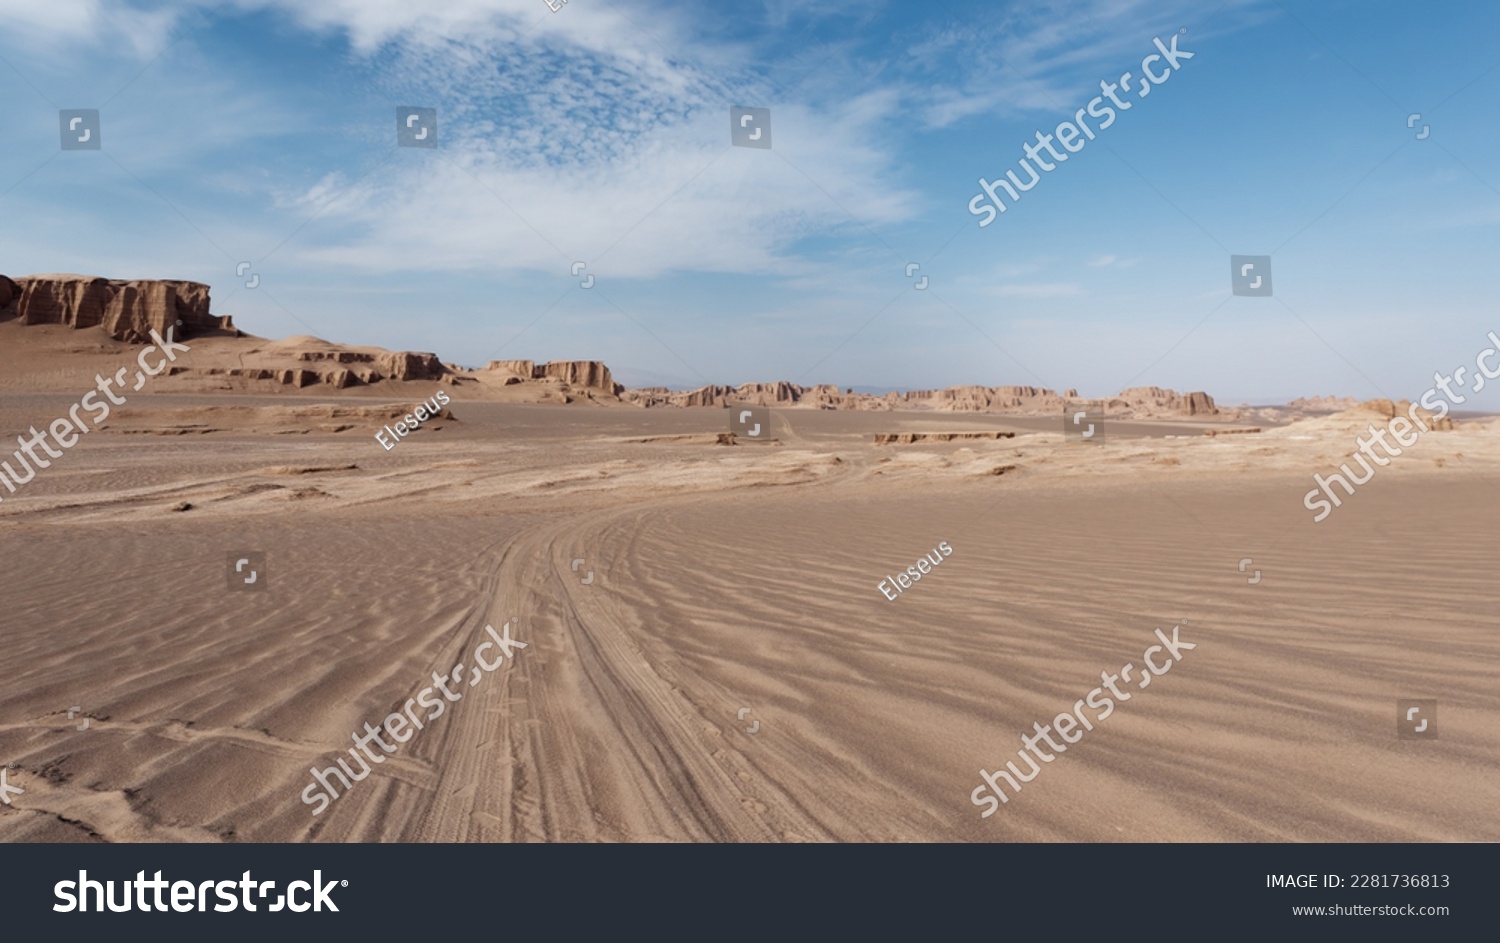  Low-angle view of the car trails in the sand and formations known as Kaluts in the background, Dasht-e Lut Desert, Iran #2281736813